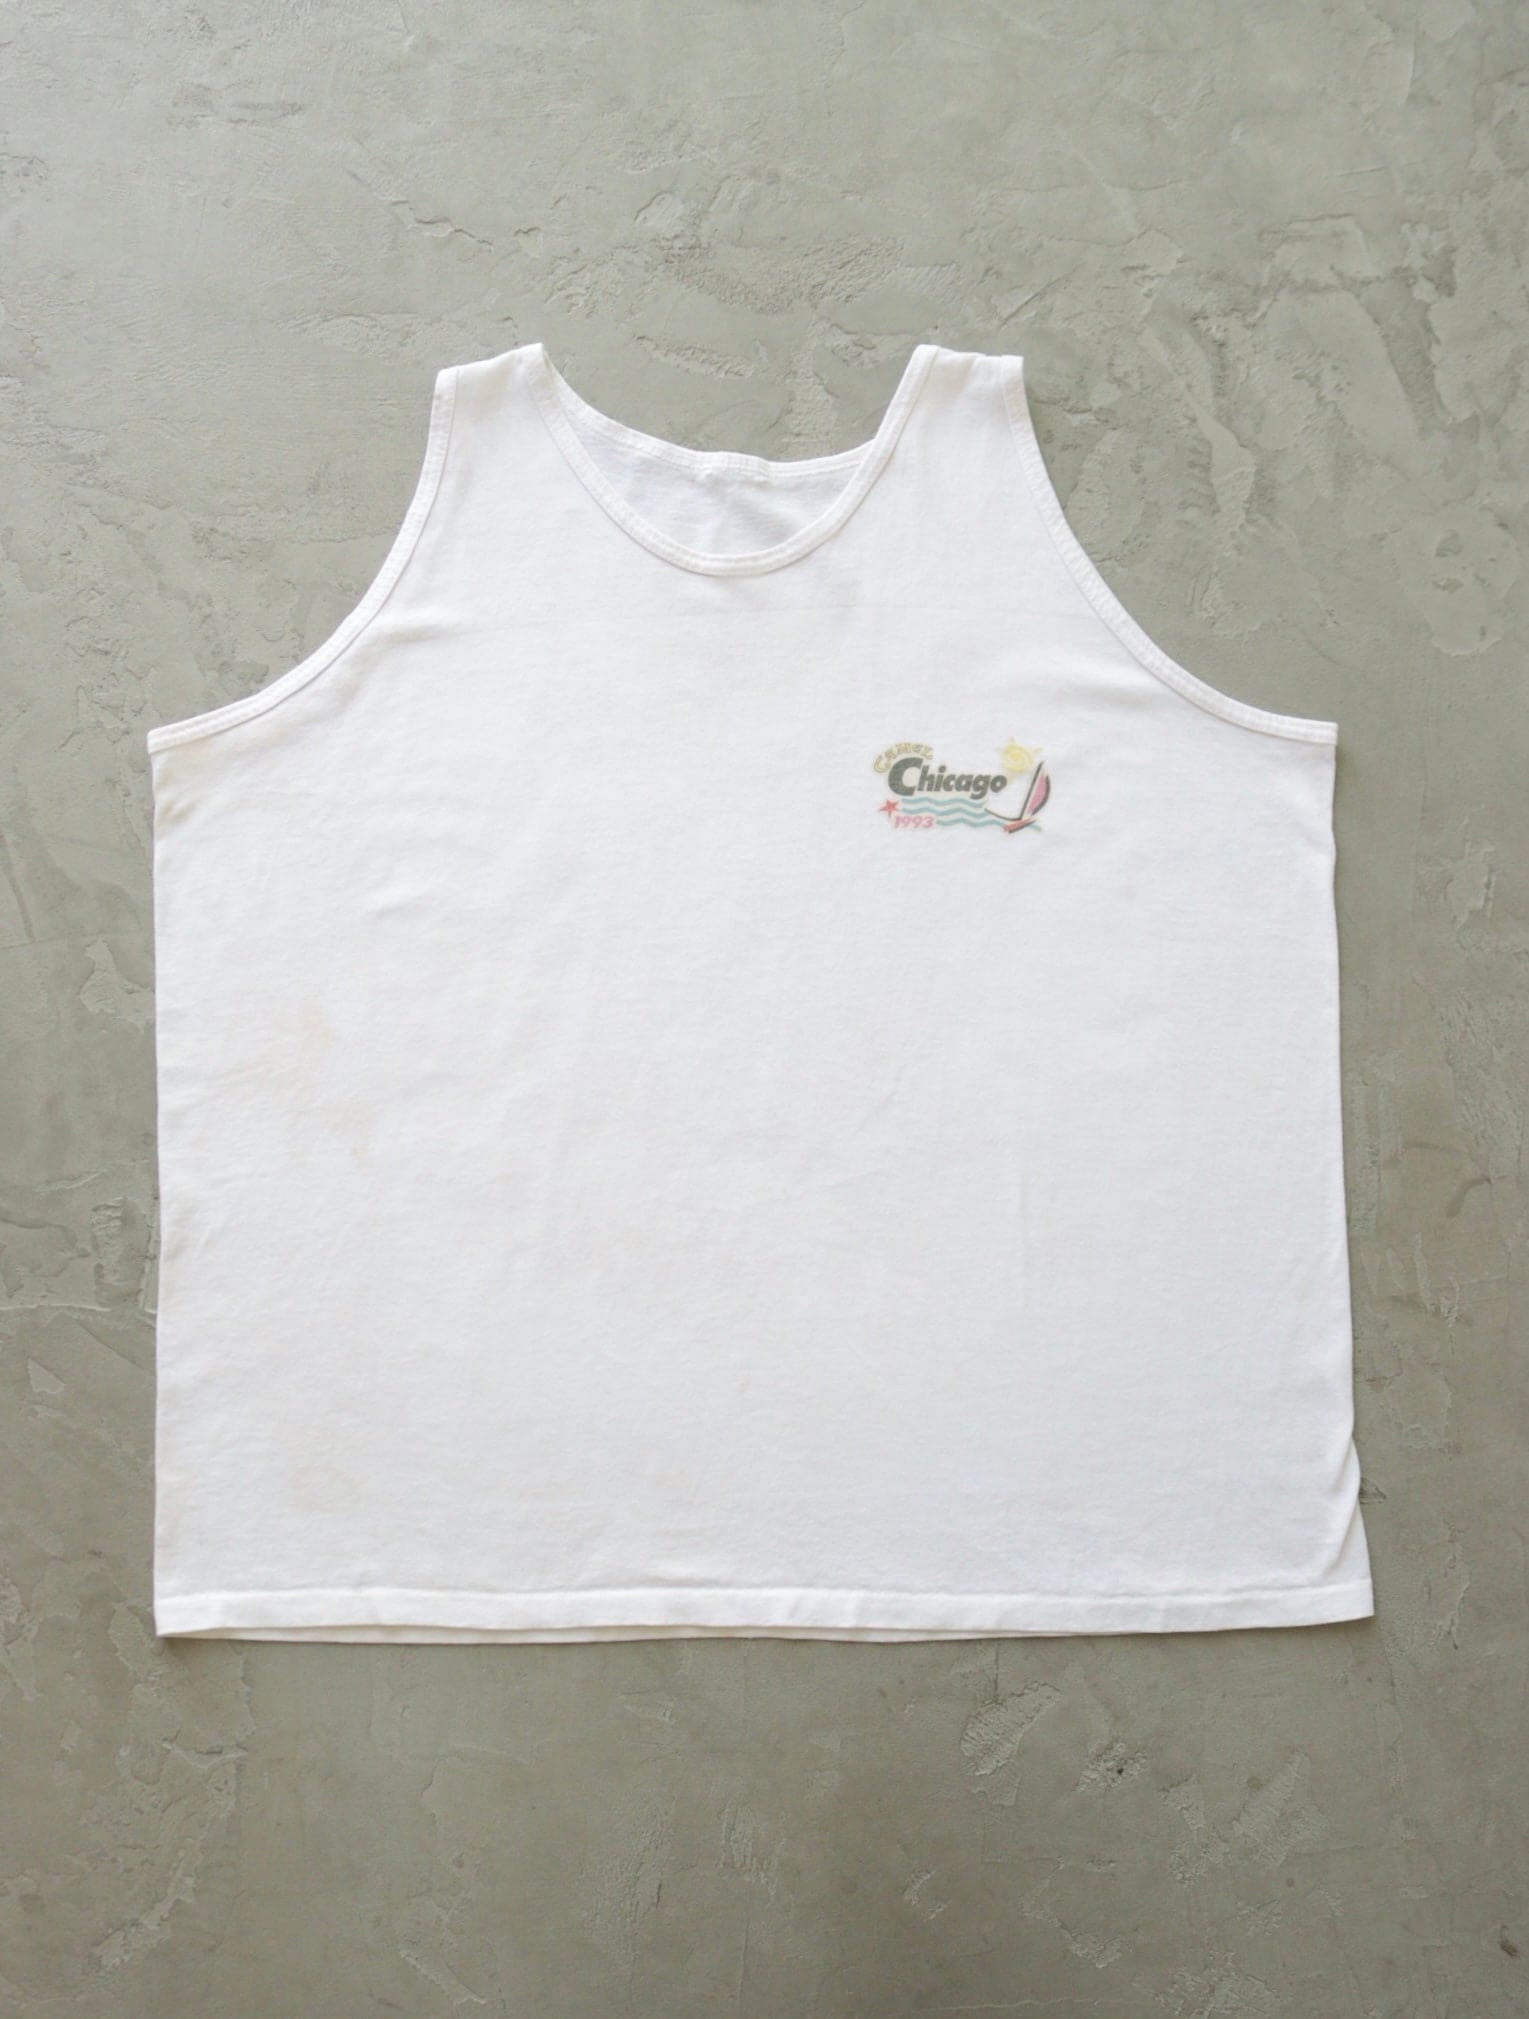 1990S CAMEL TANK TOP - TWO FOLD